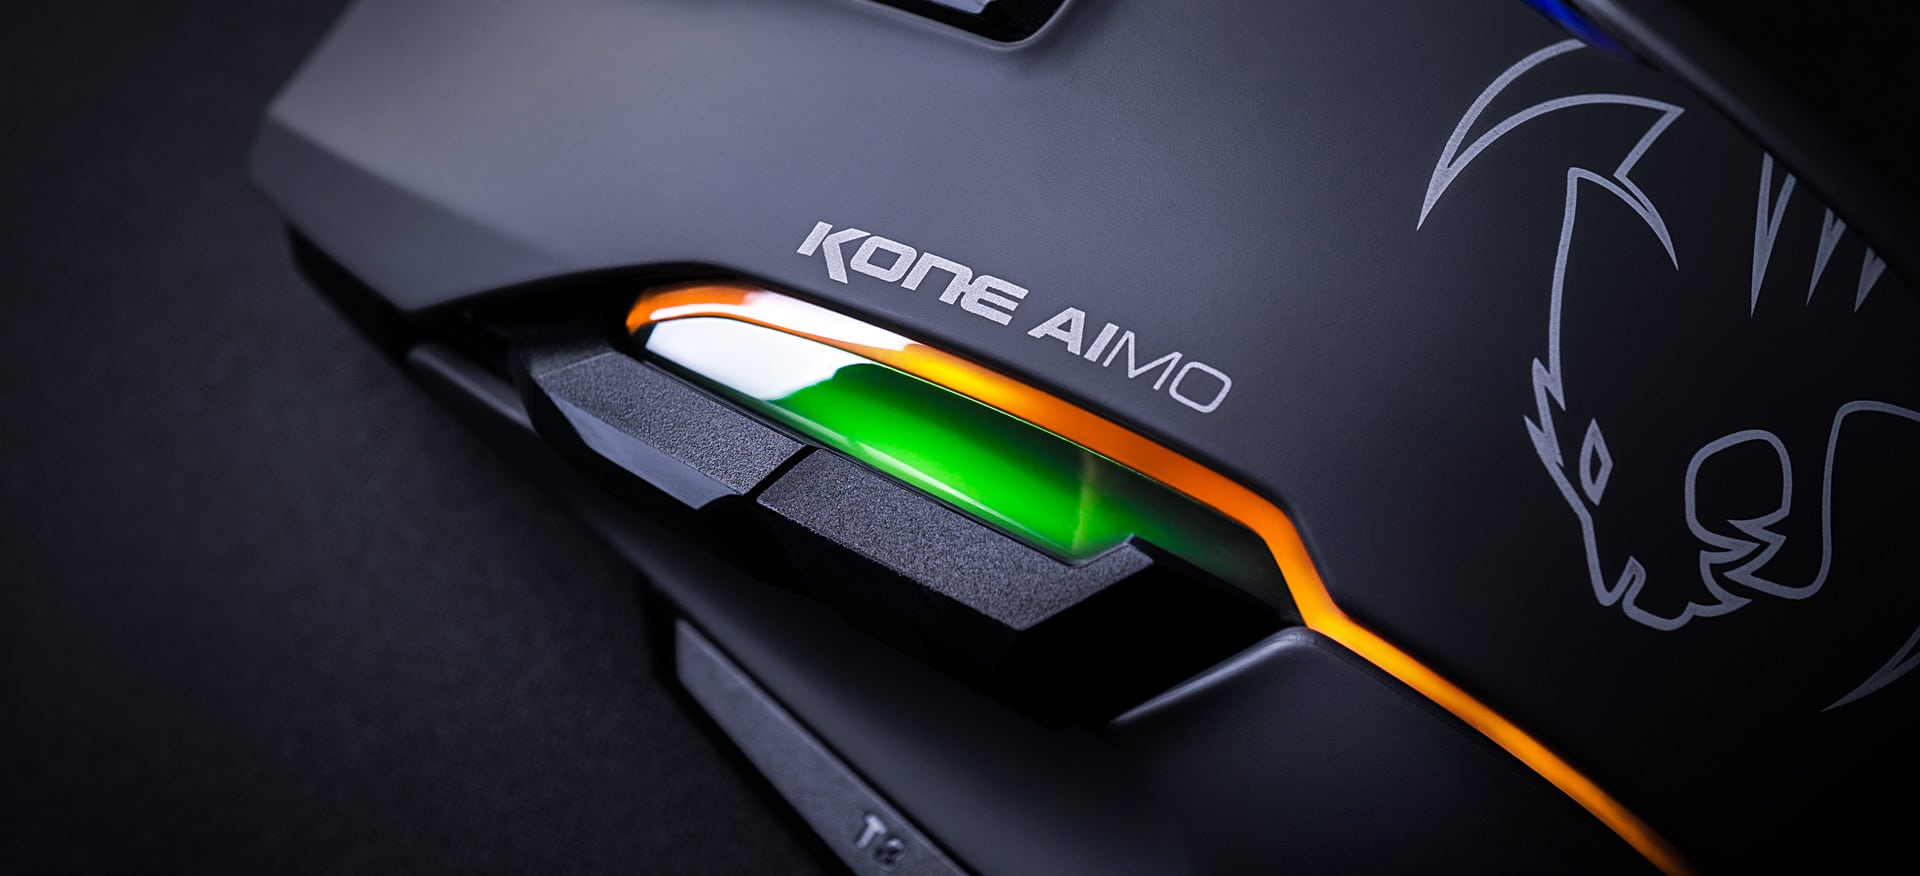 Roccat Kone Aimo Gaming Mouse, GamersRD